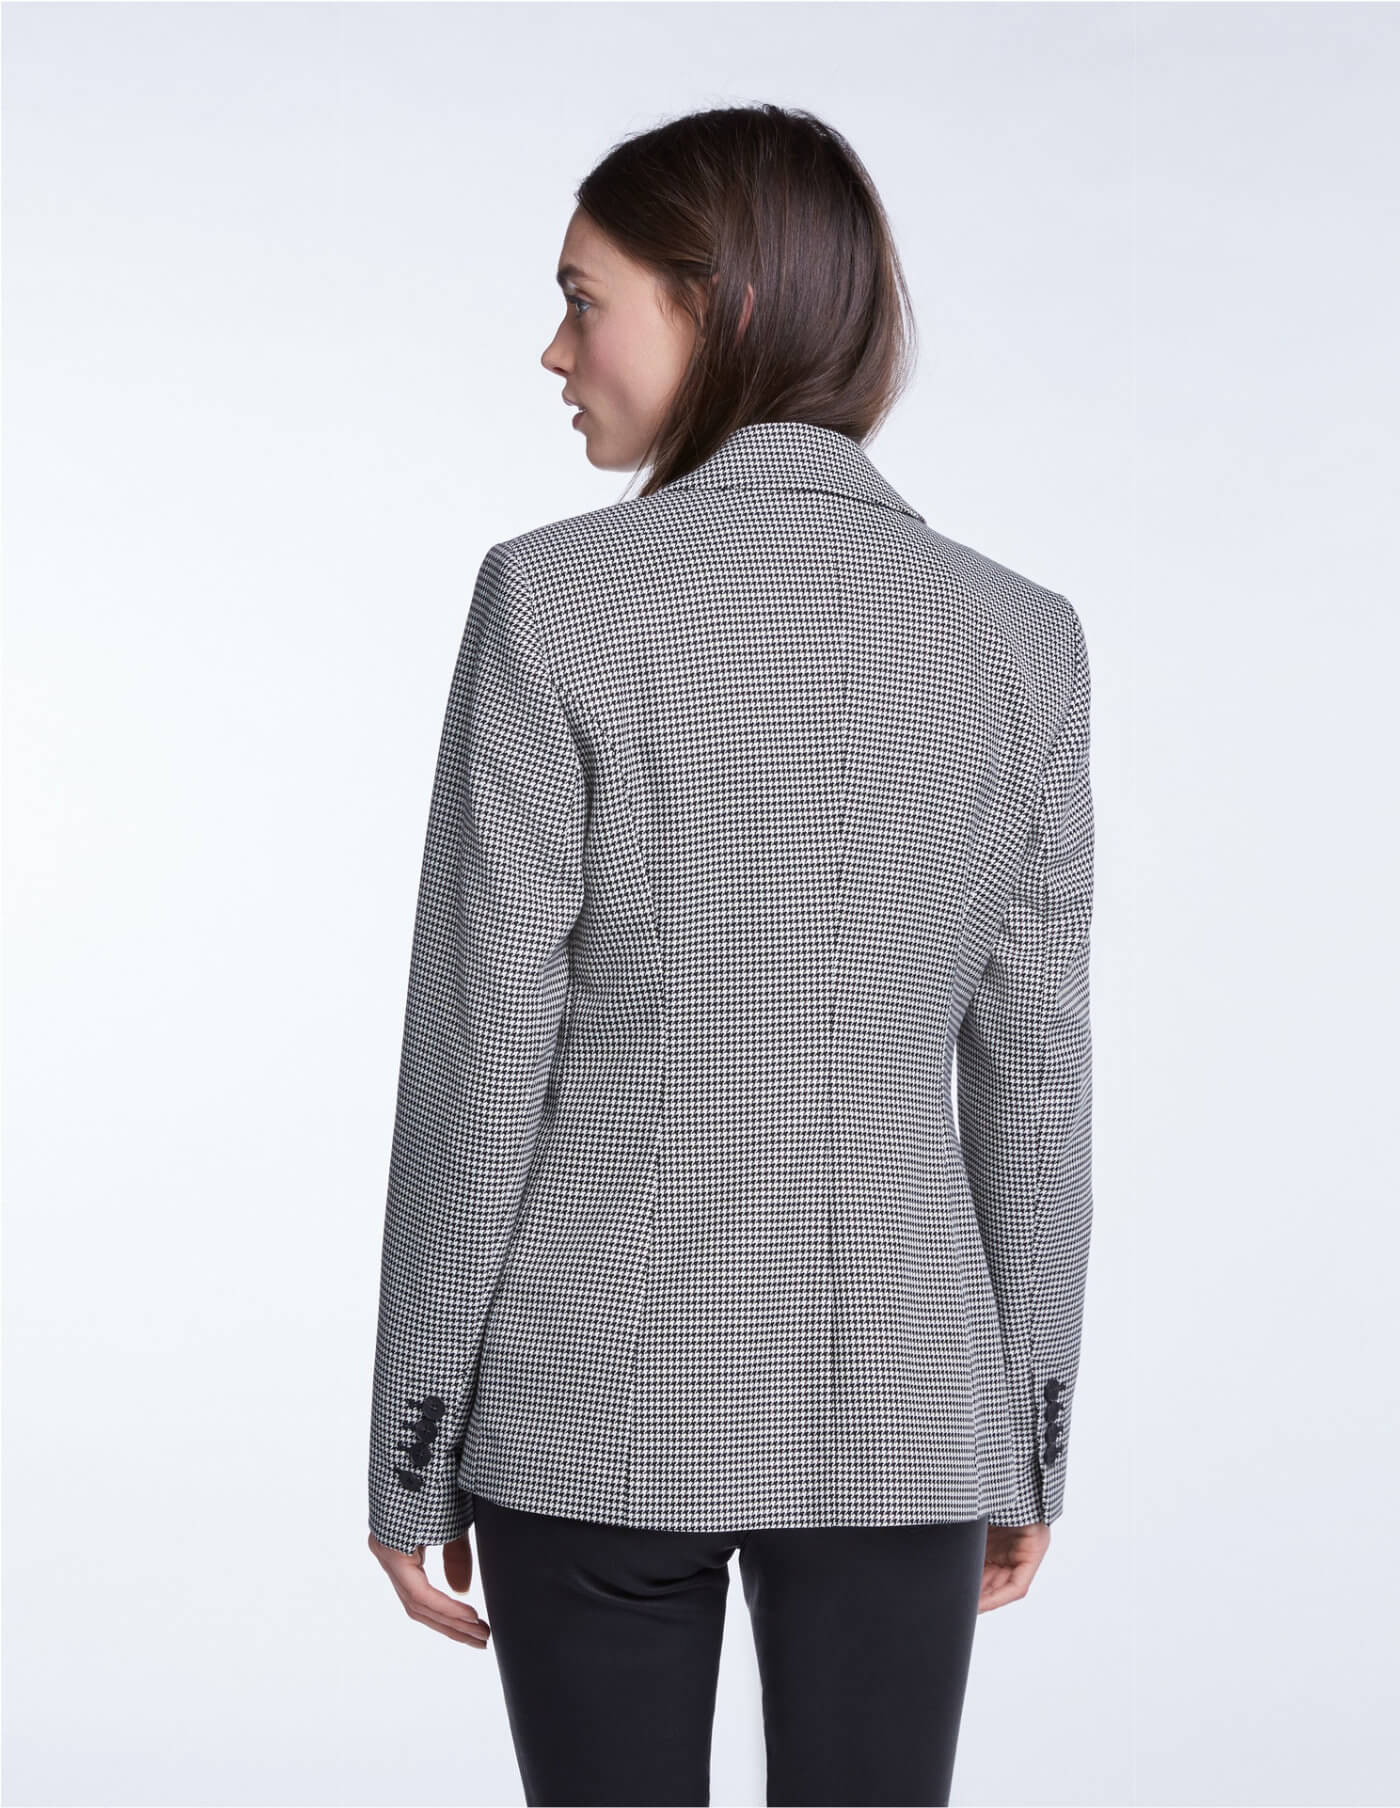 Set Fashion Houndstooth Jacket In Black And White at Storm Fashion